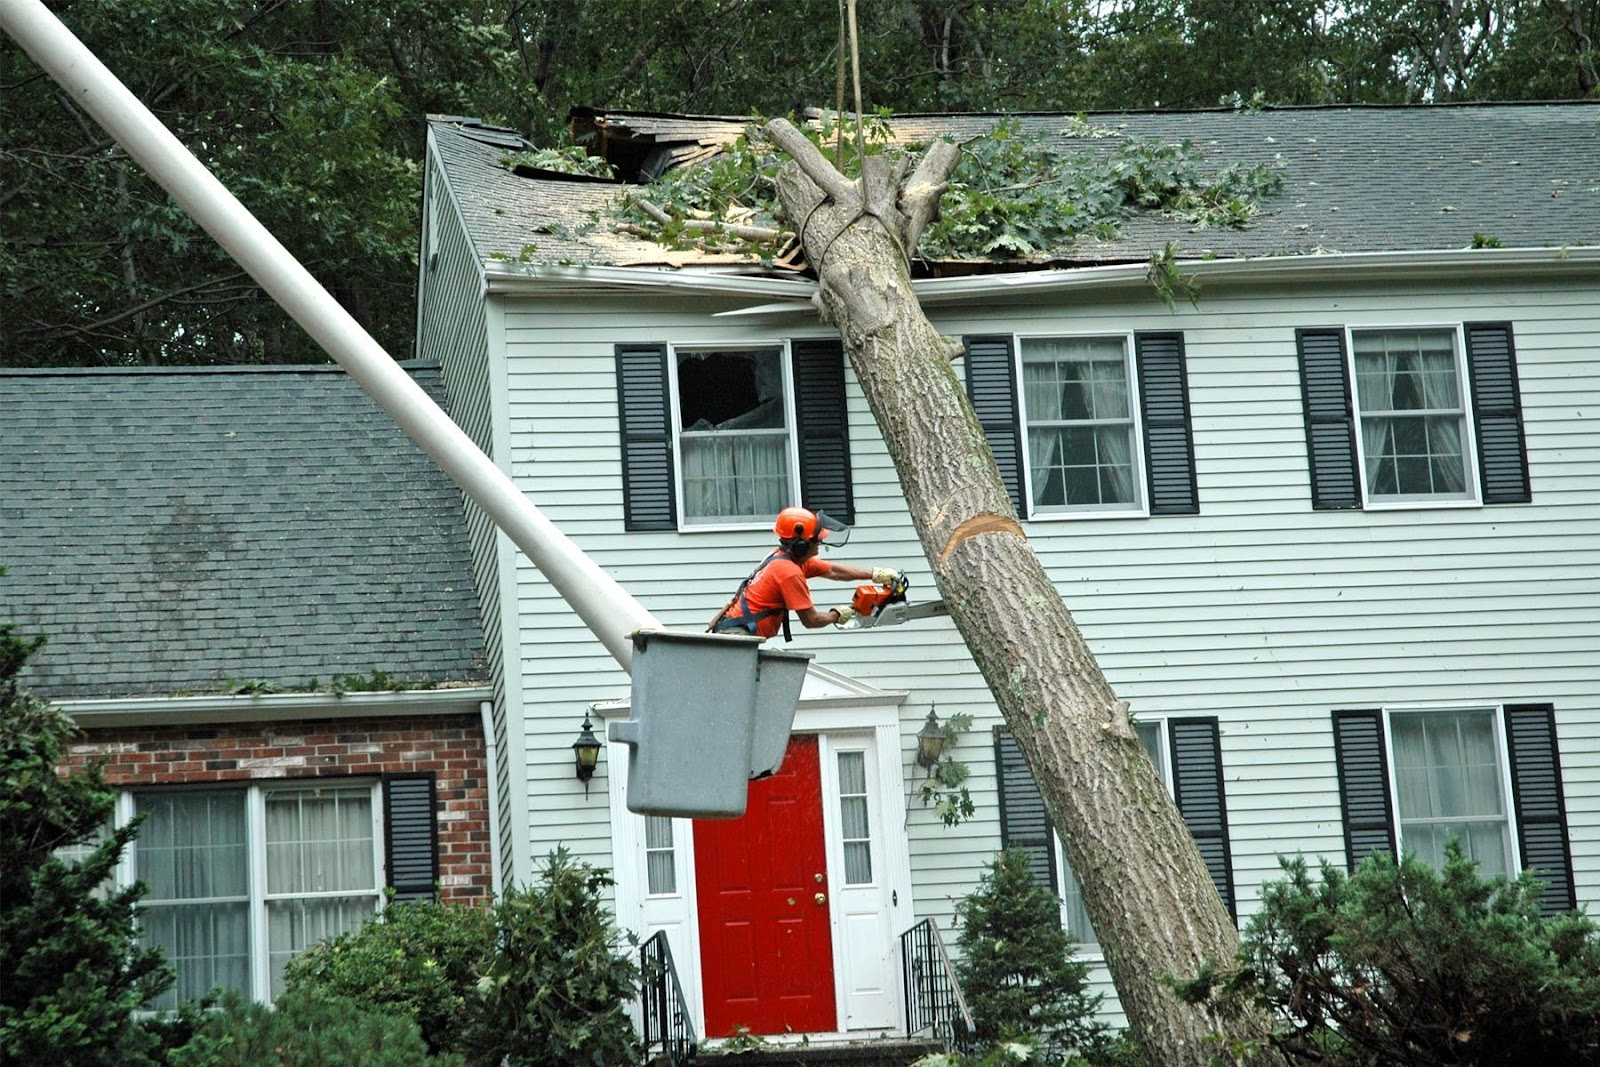 Tree Care After Extreme Weather: Emergency Tree Services Guide